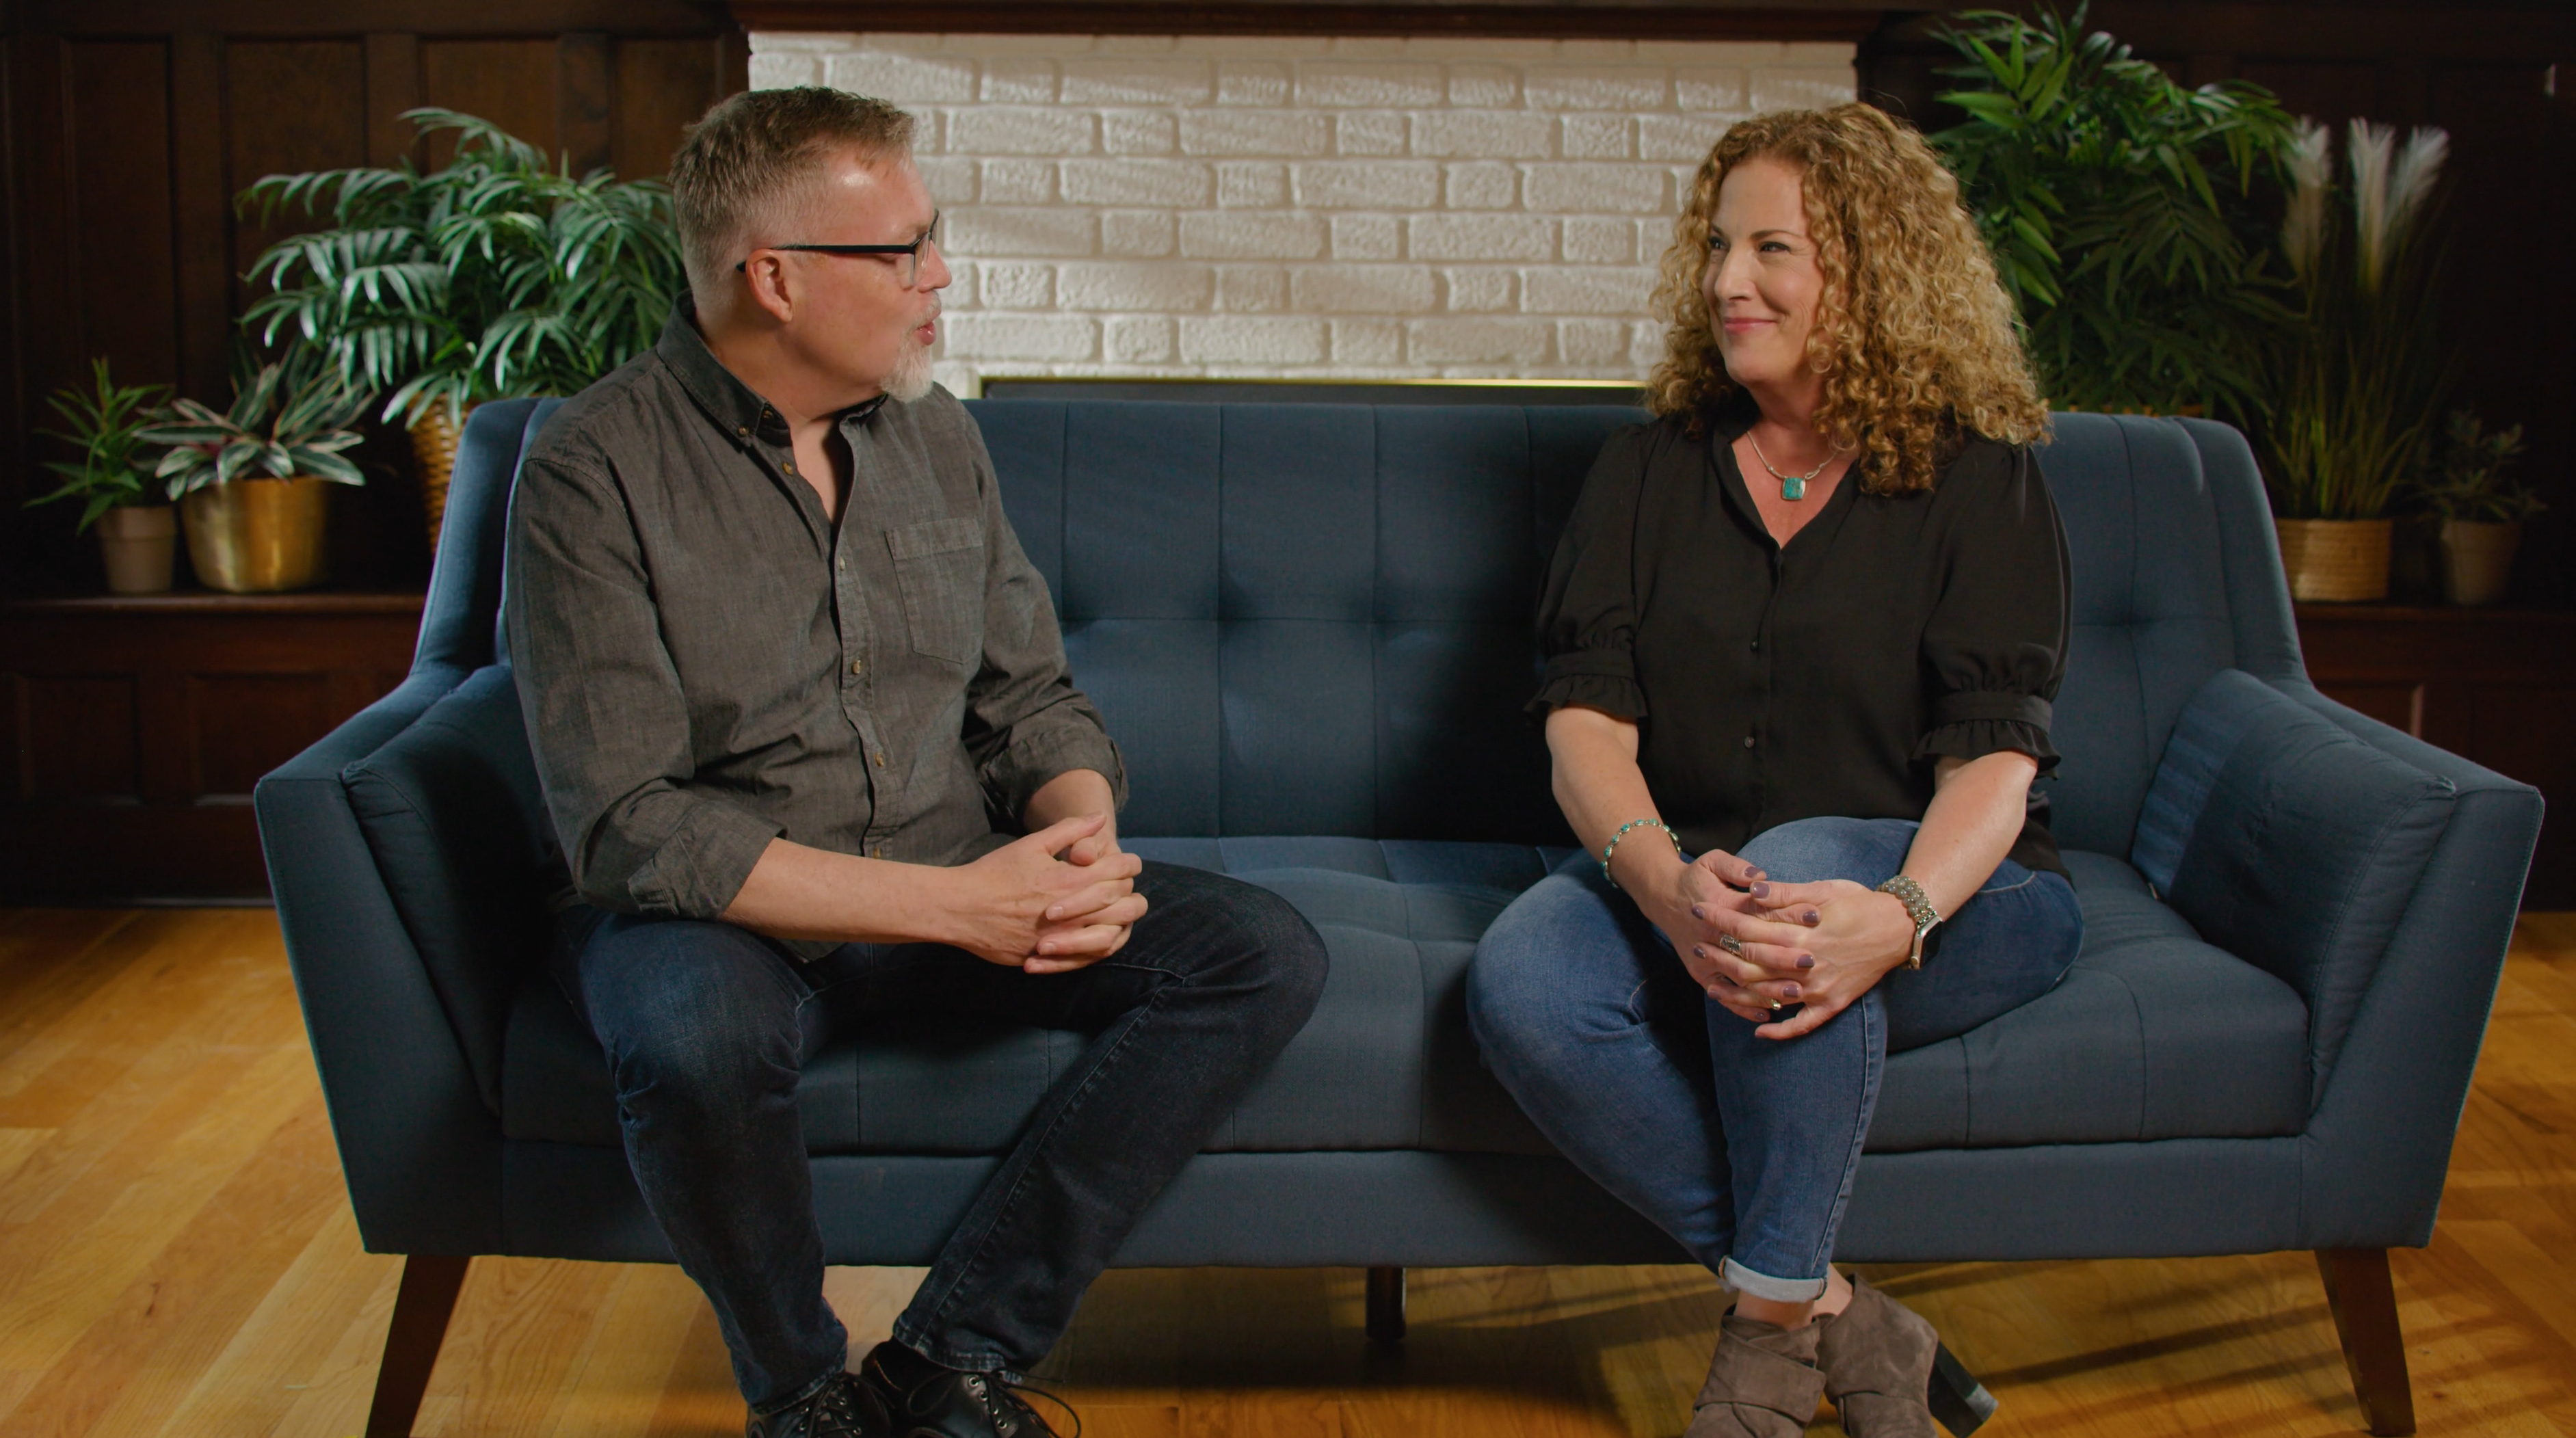 Jeff Schreifels and Lisa Robertson respond to the Question of the Month: How do you plan for a transformational gift?